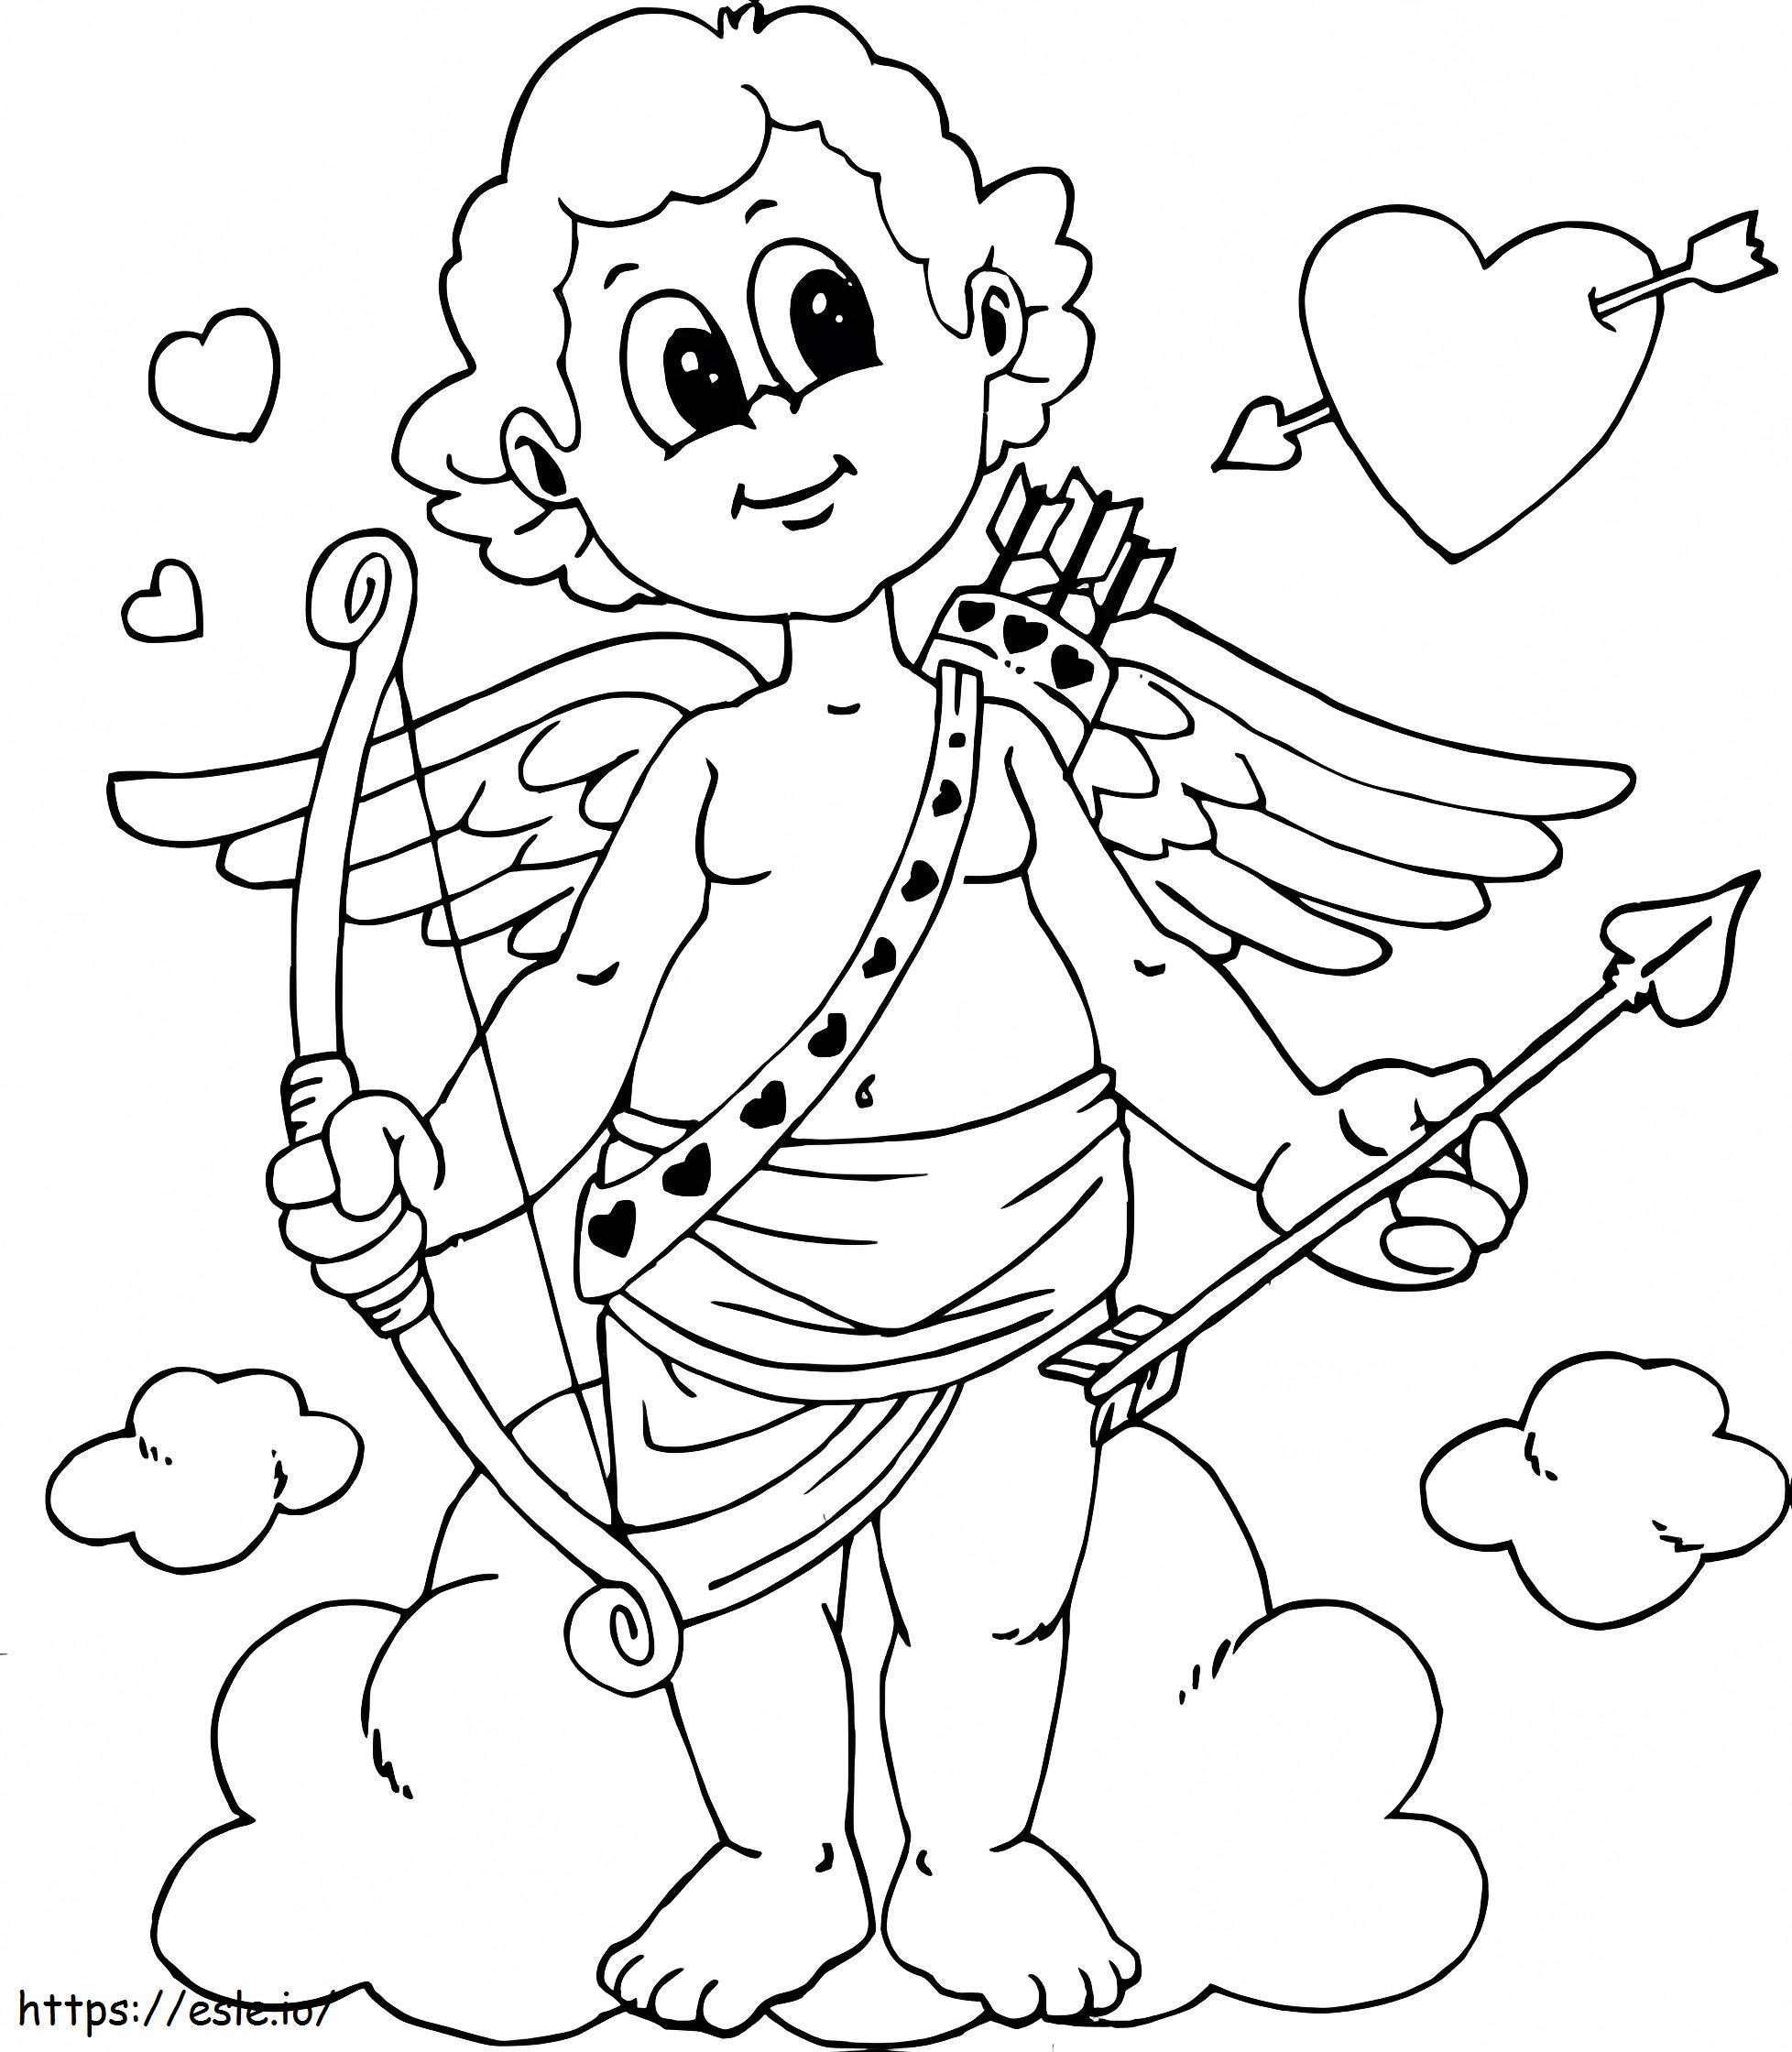 Cupid Standing coloring page